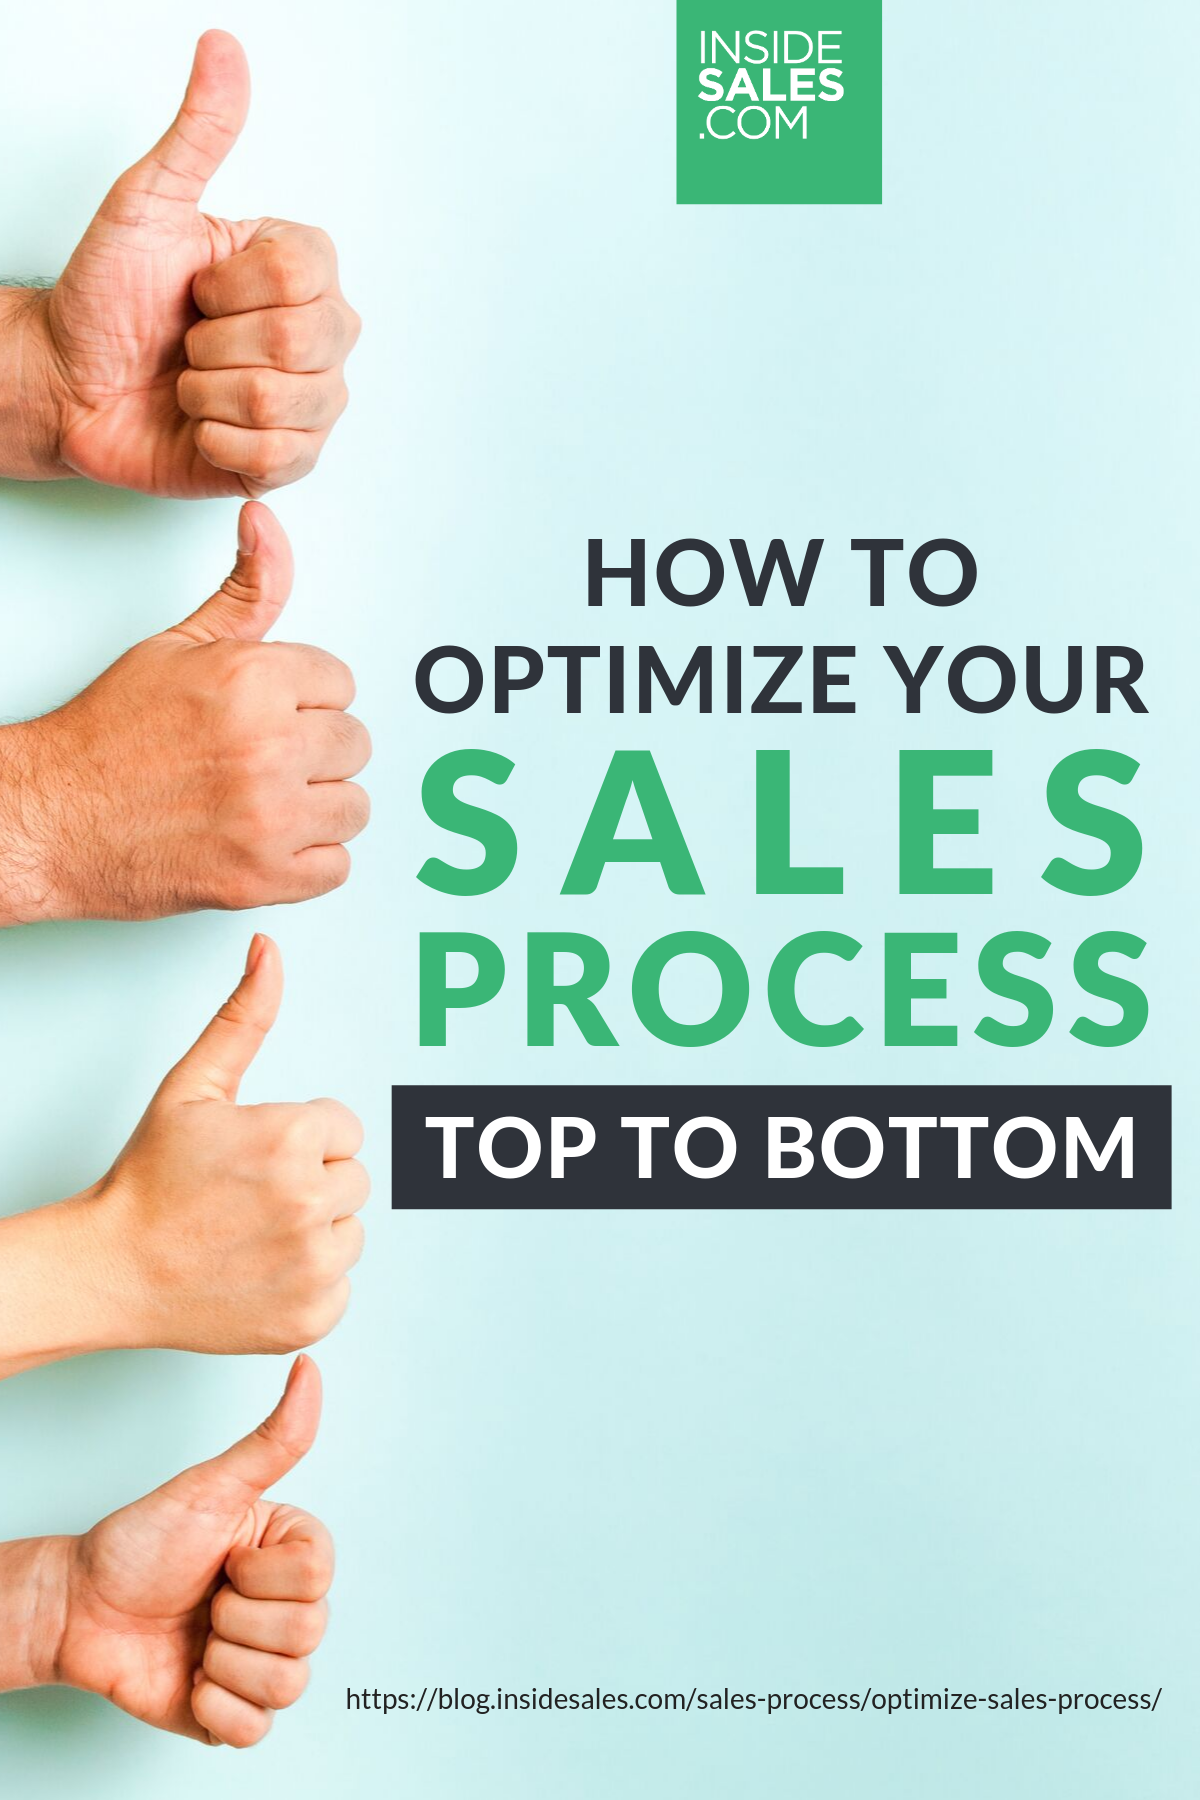 How To Optimize Your Sales Process Top To Bottom https://www.insidesales.com/blog/sales-process/optimize-sales-process/